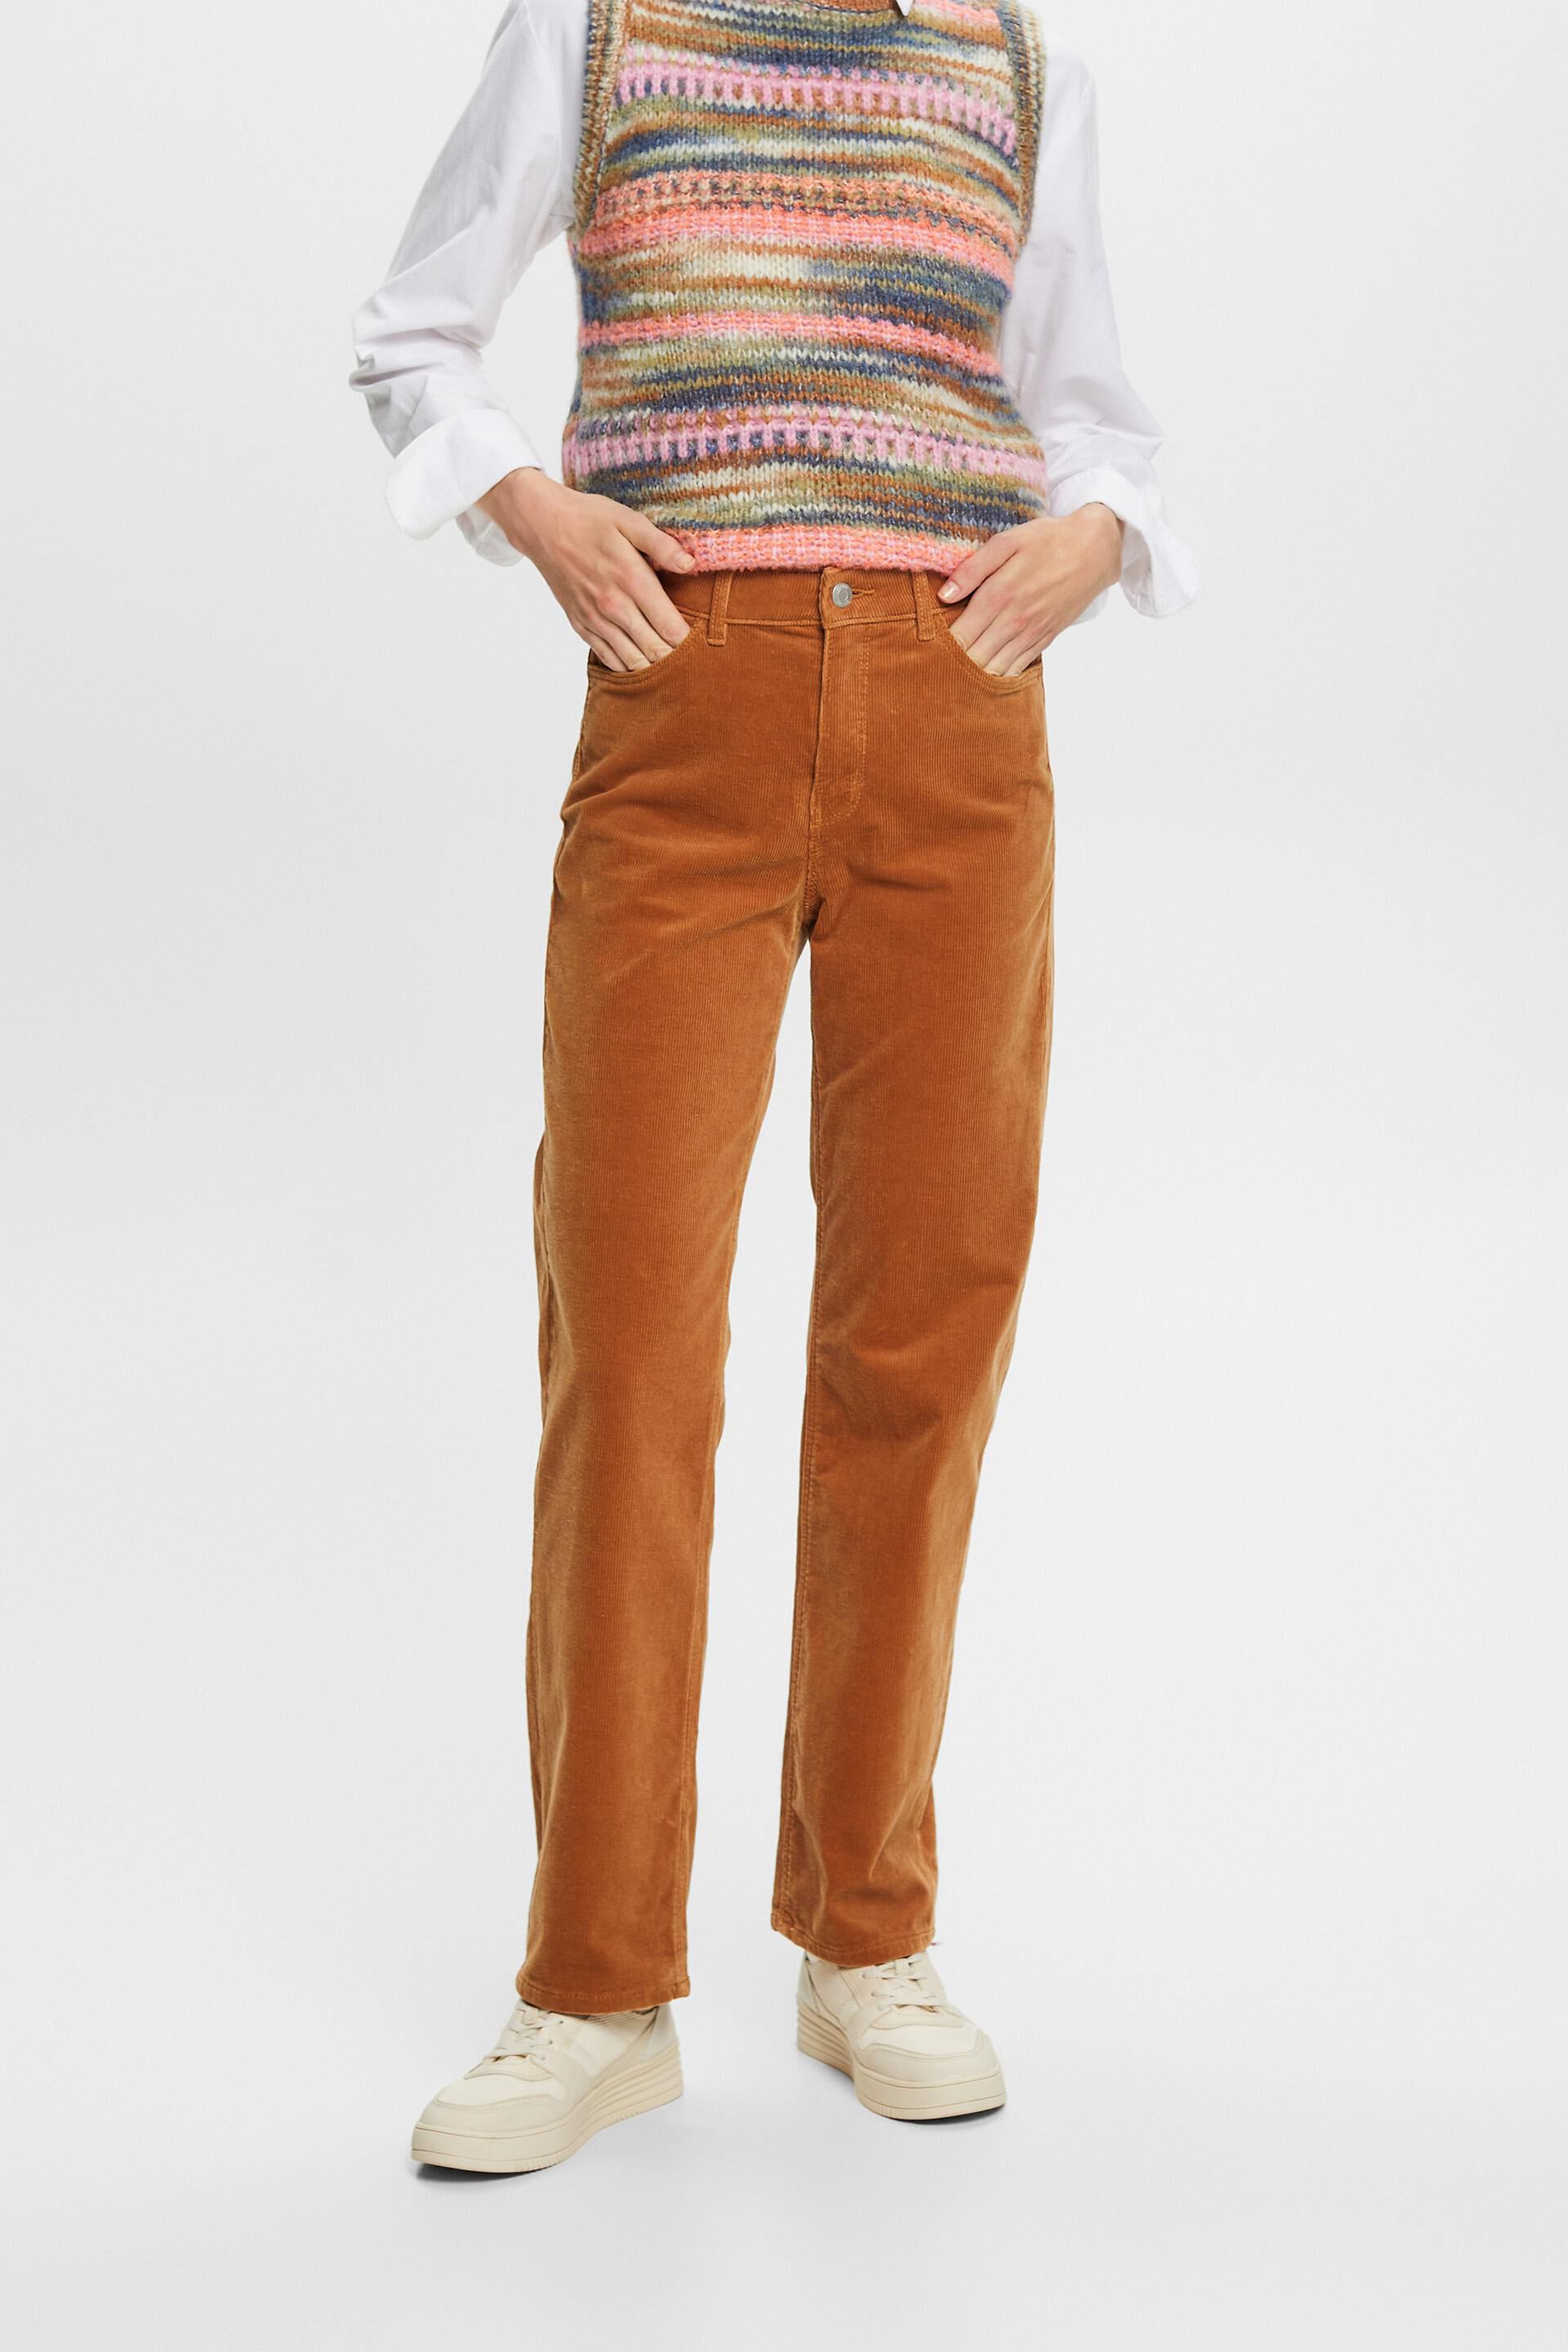 Buy Esprit Brown Cord Trousers from Next Luxembourg